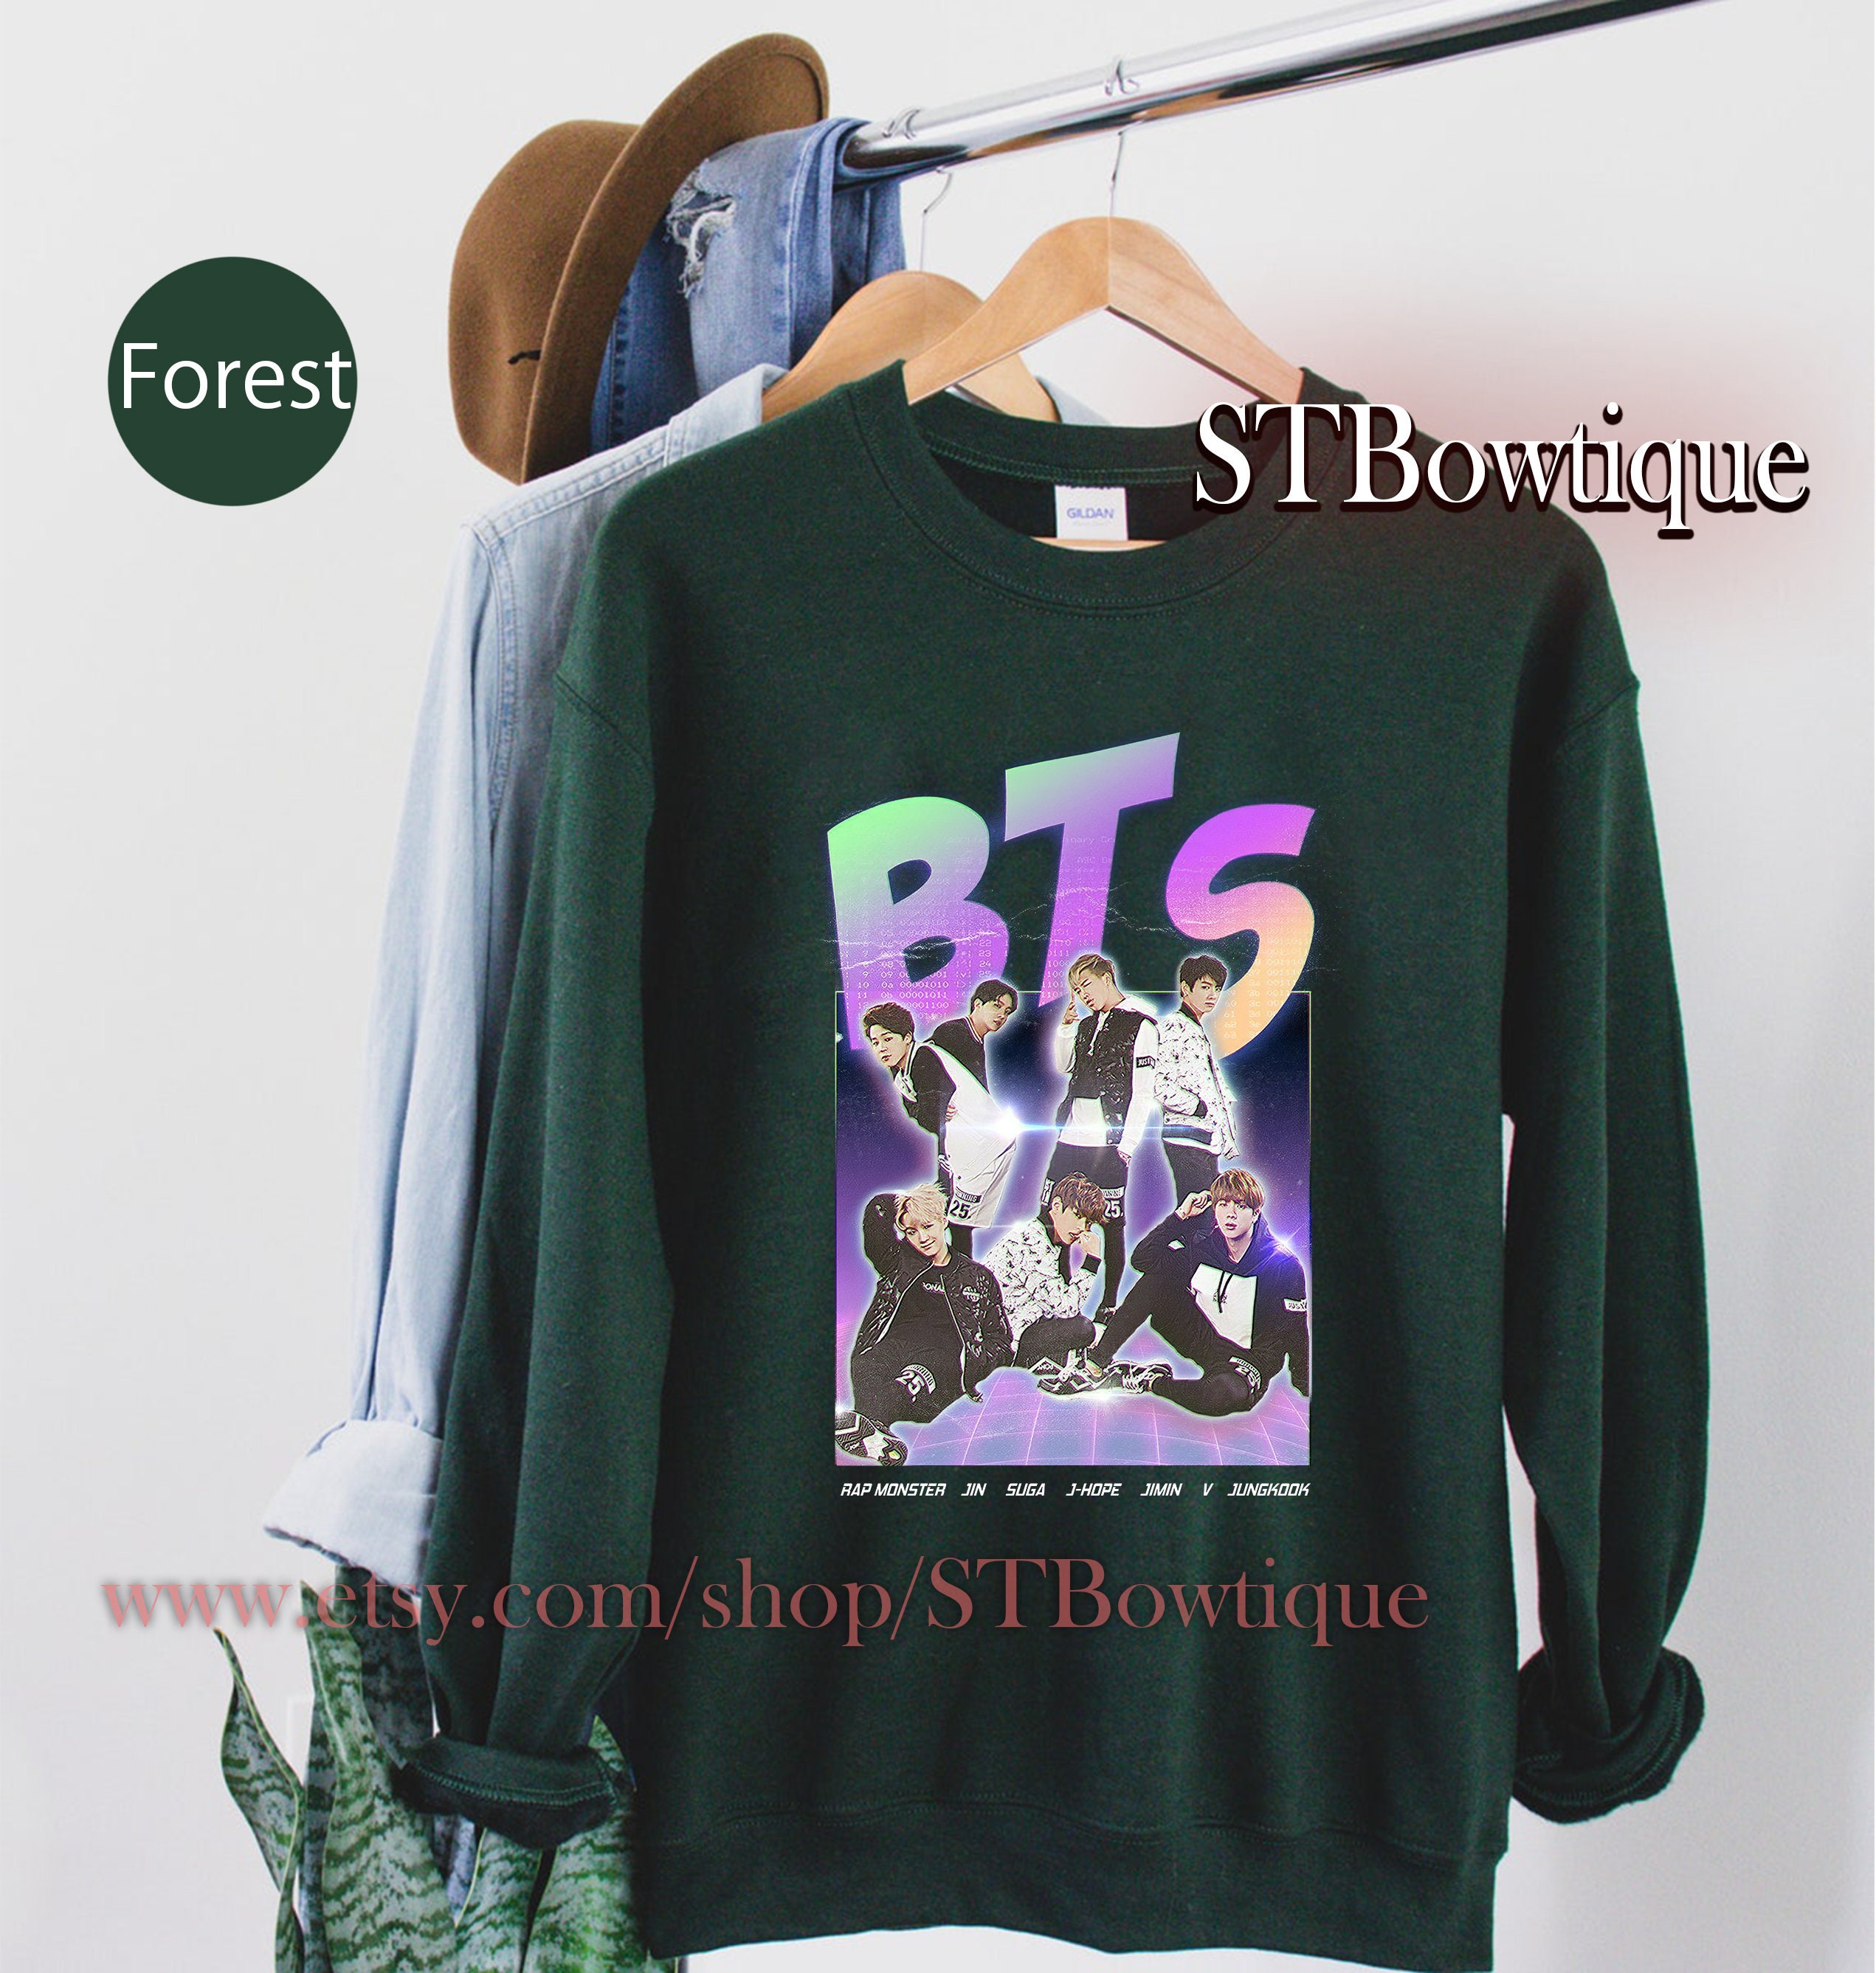 Group Bts Kpop Idols Sign For Army Jungkook Rap Monster Taehyung Unisex T-Shirt